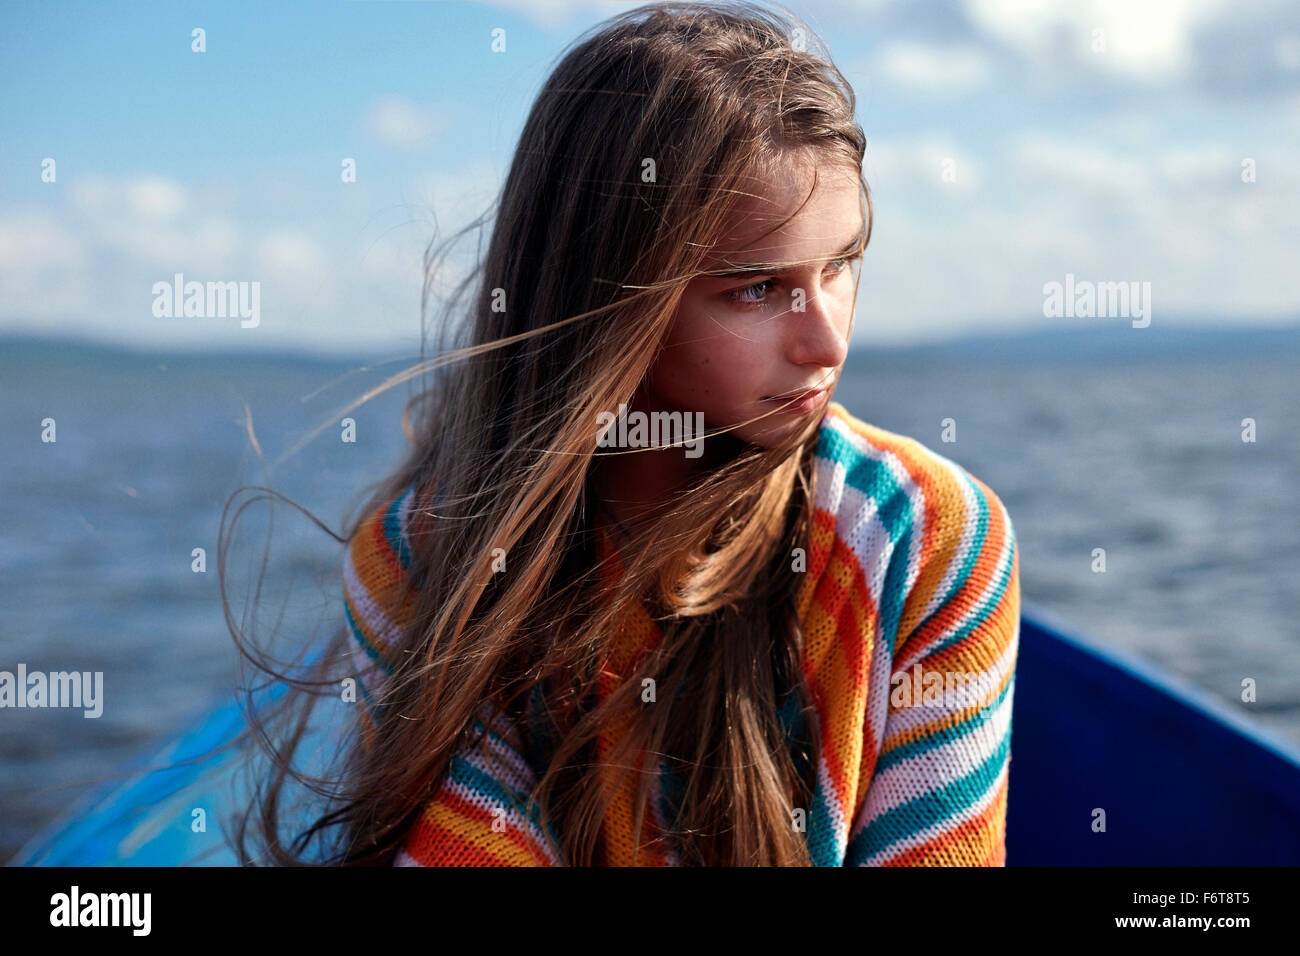 Portrait of teenage girl in canoe on lake Banque D'Images